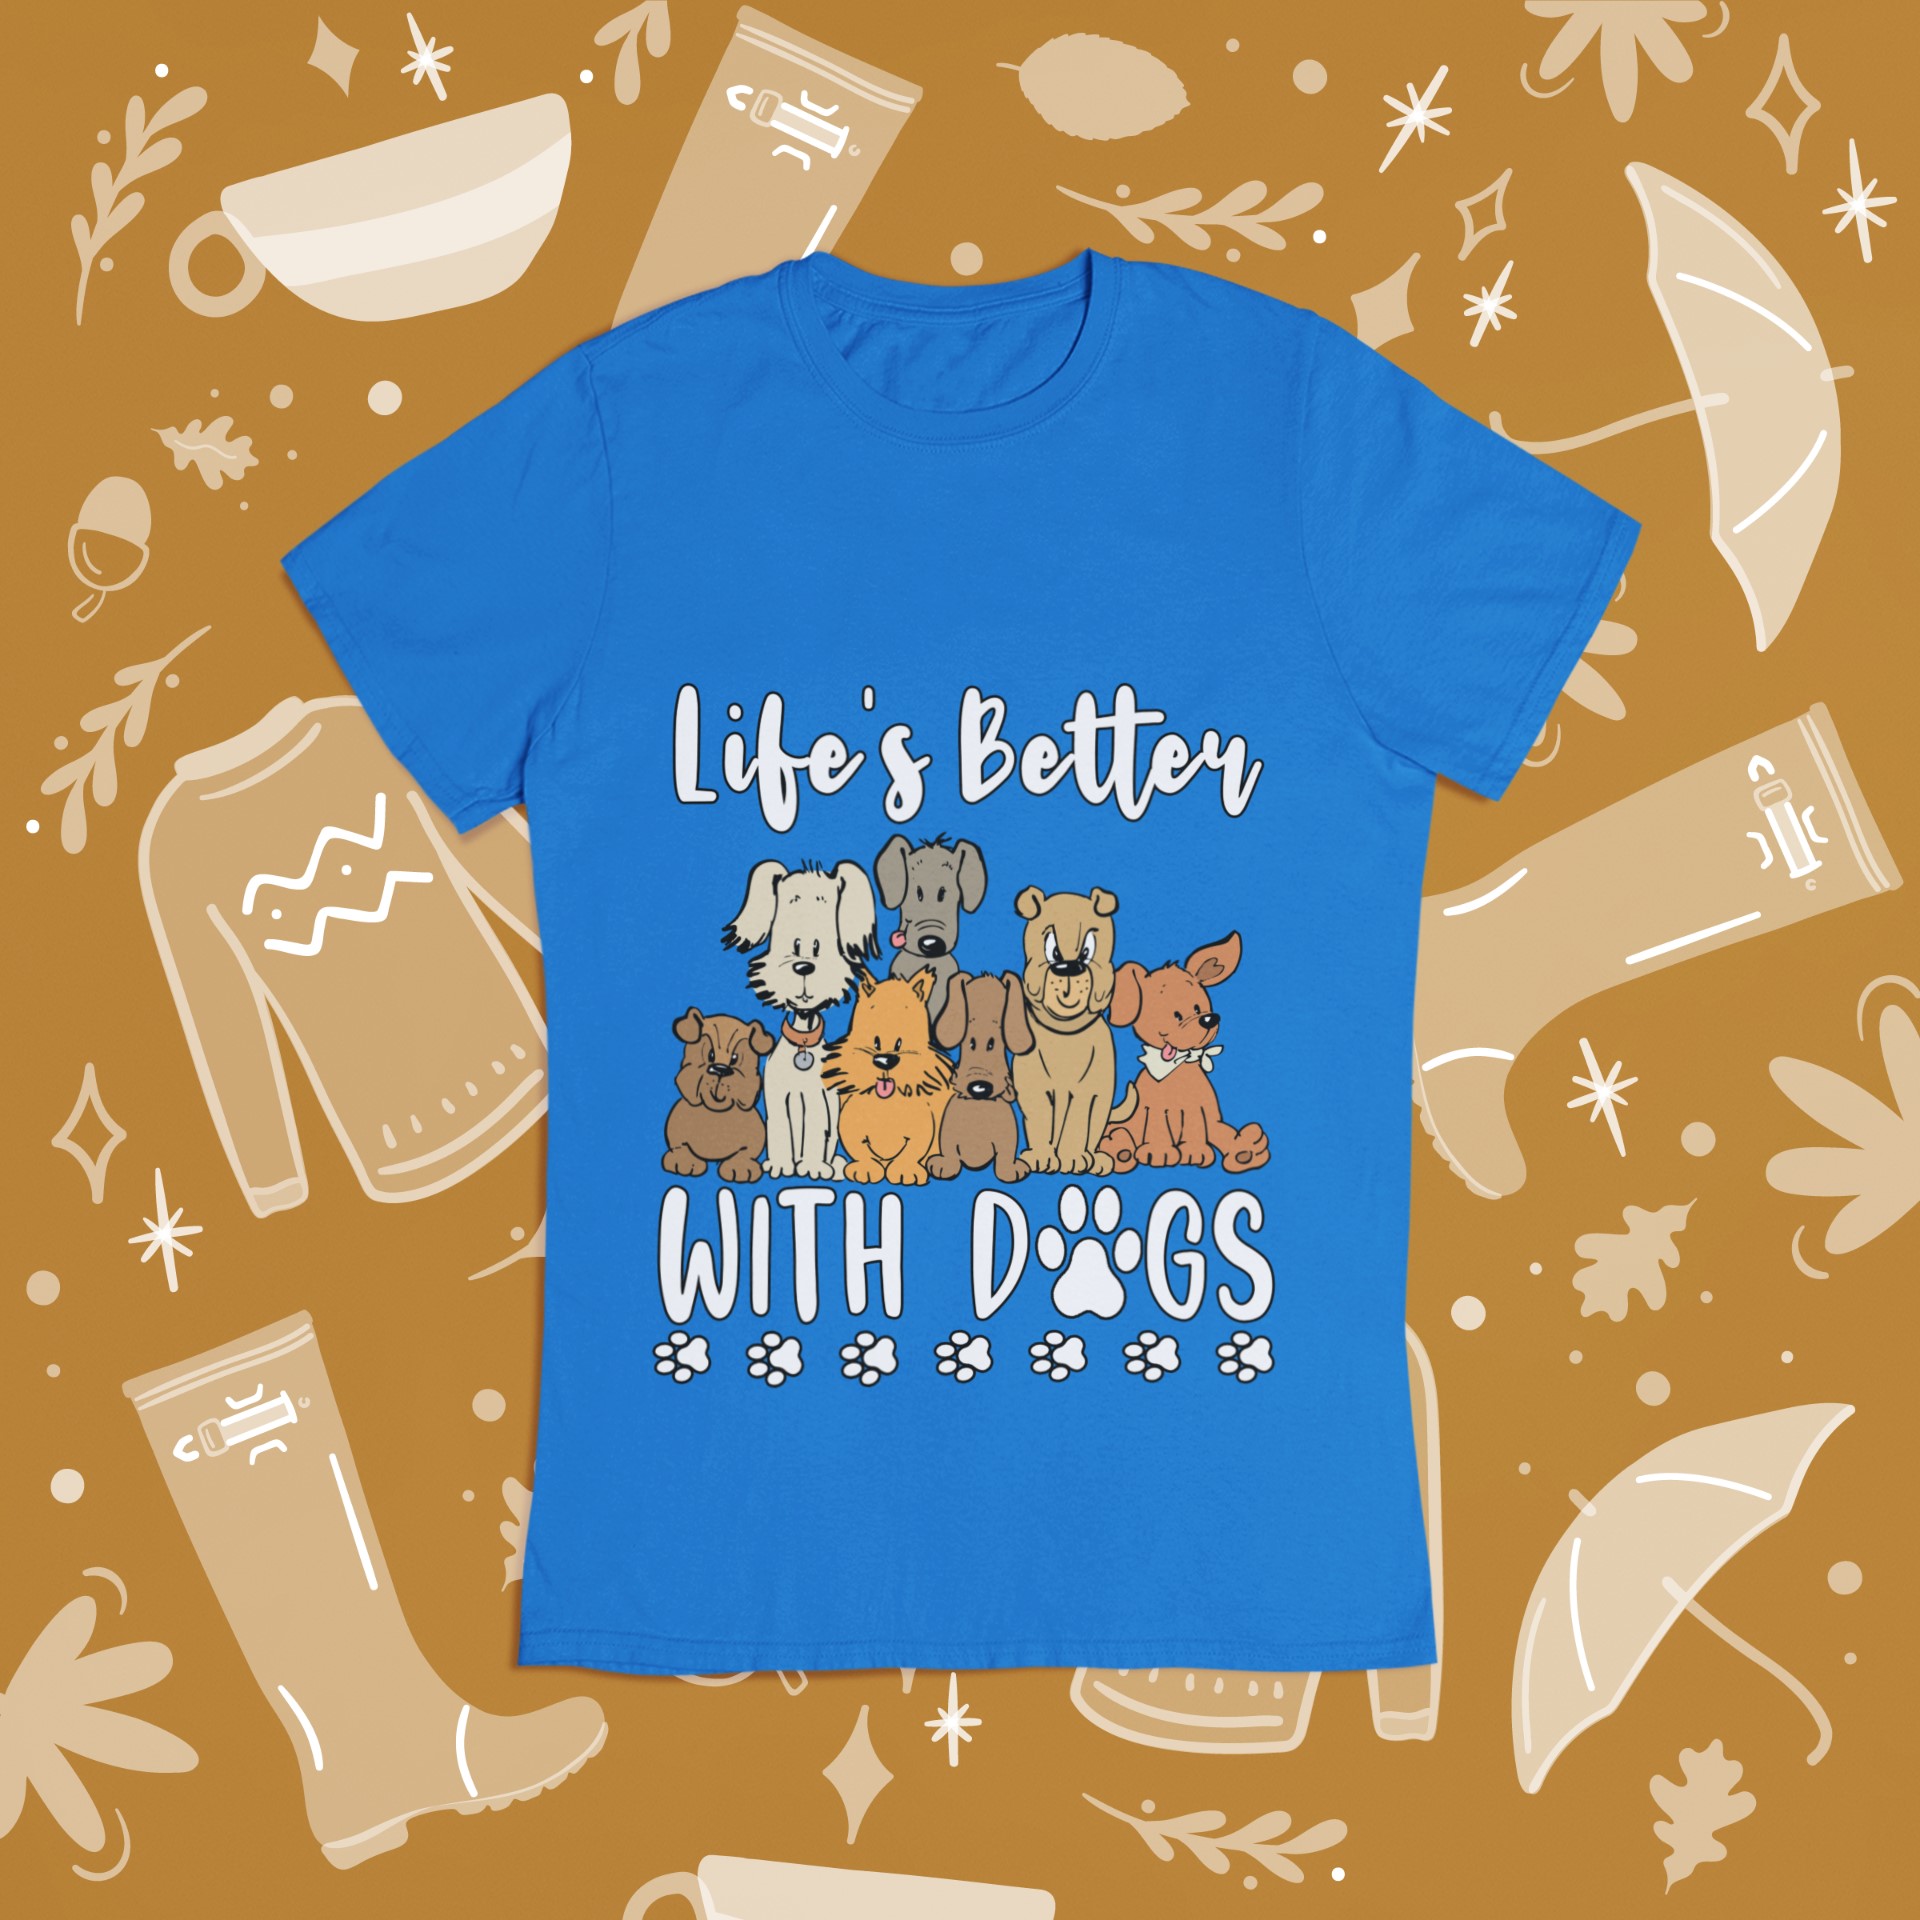 Life's better with dogs - Kind of dogs